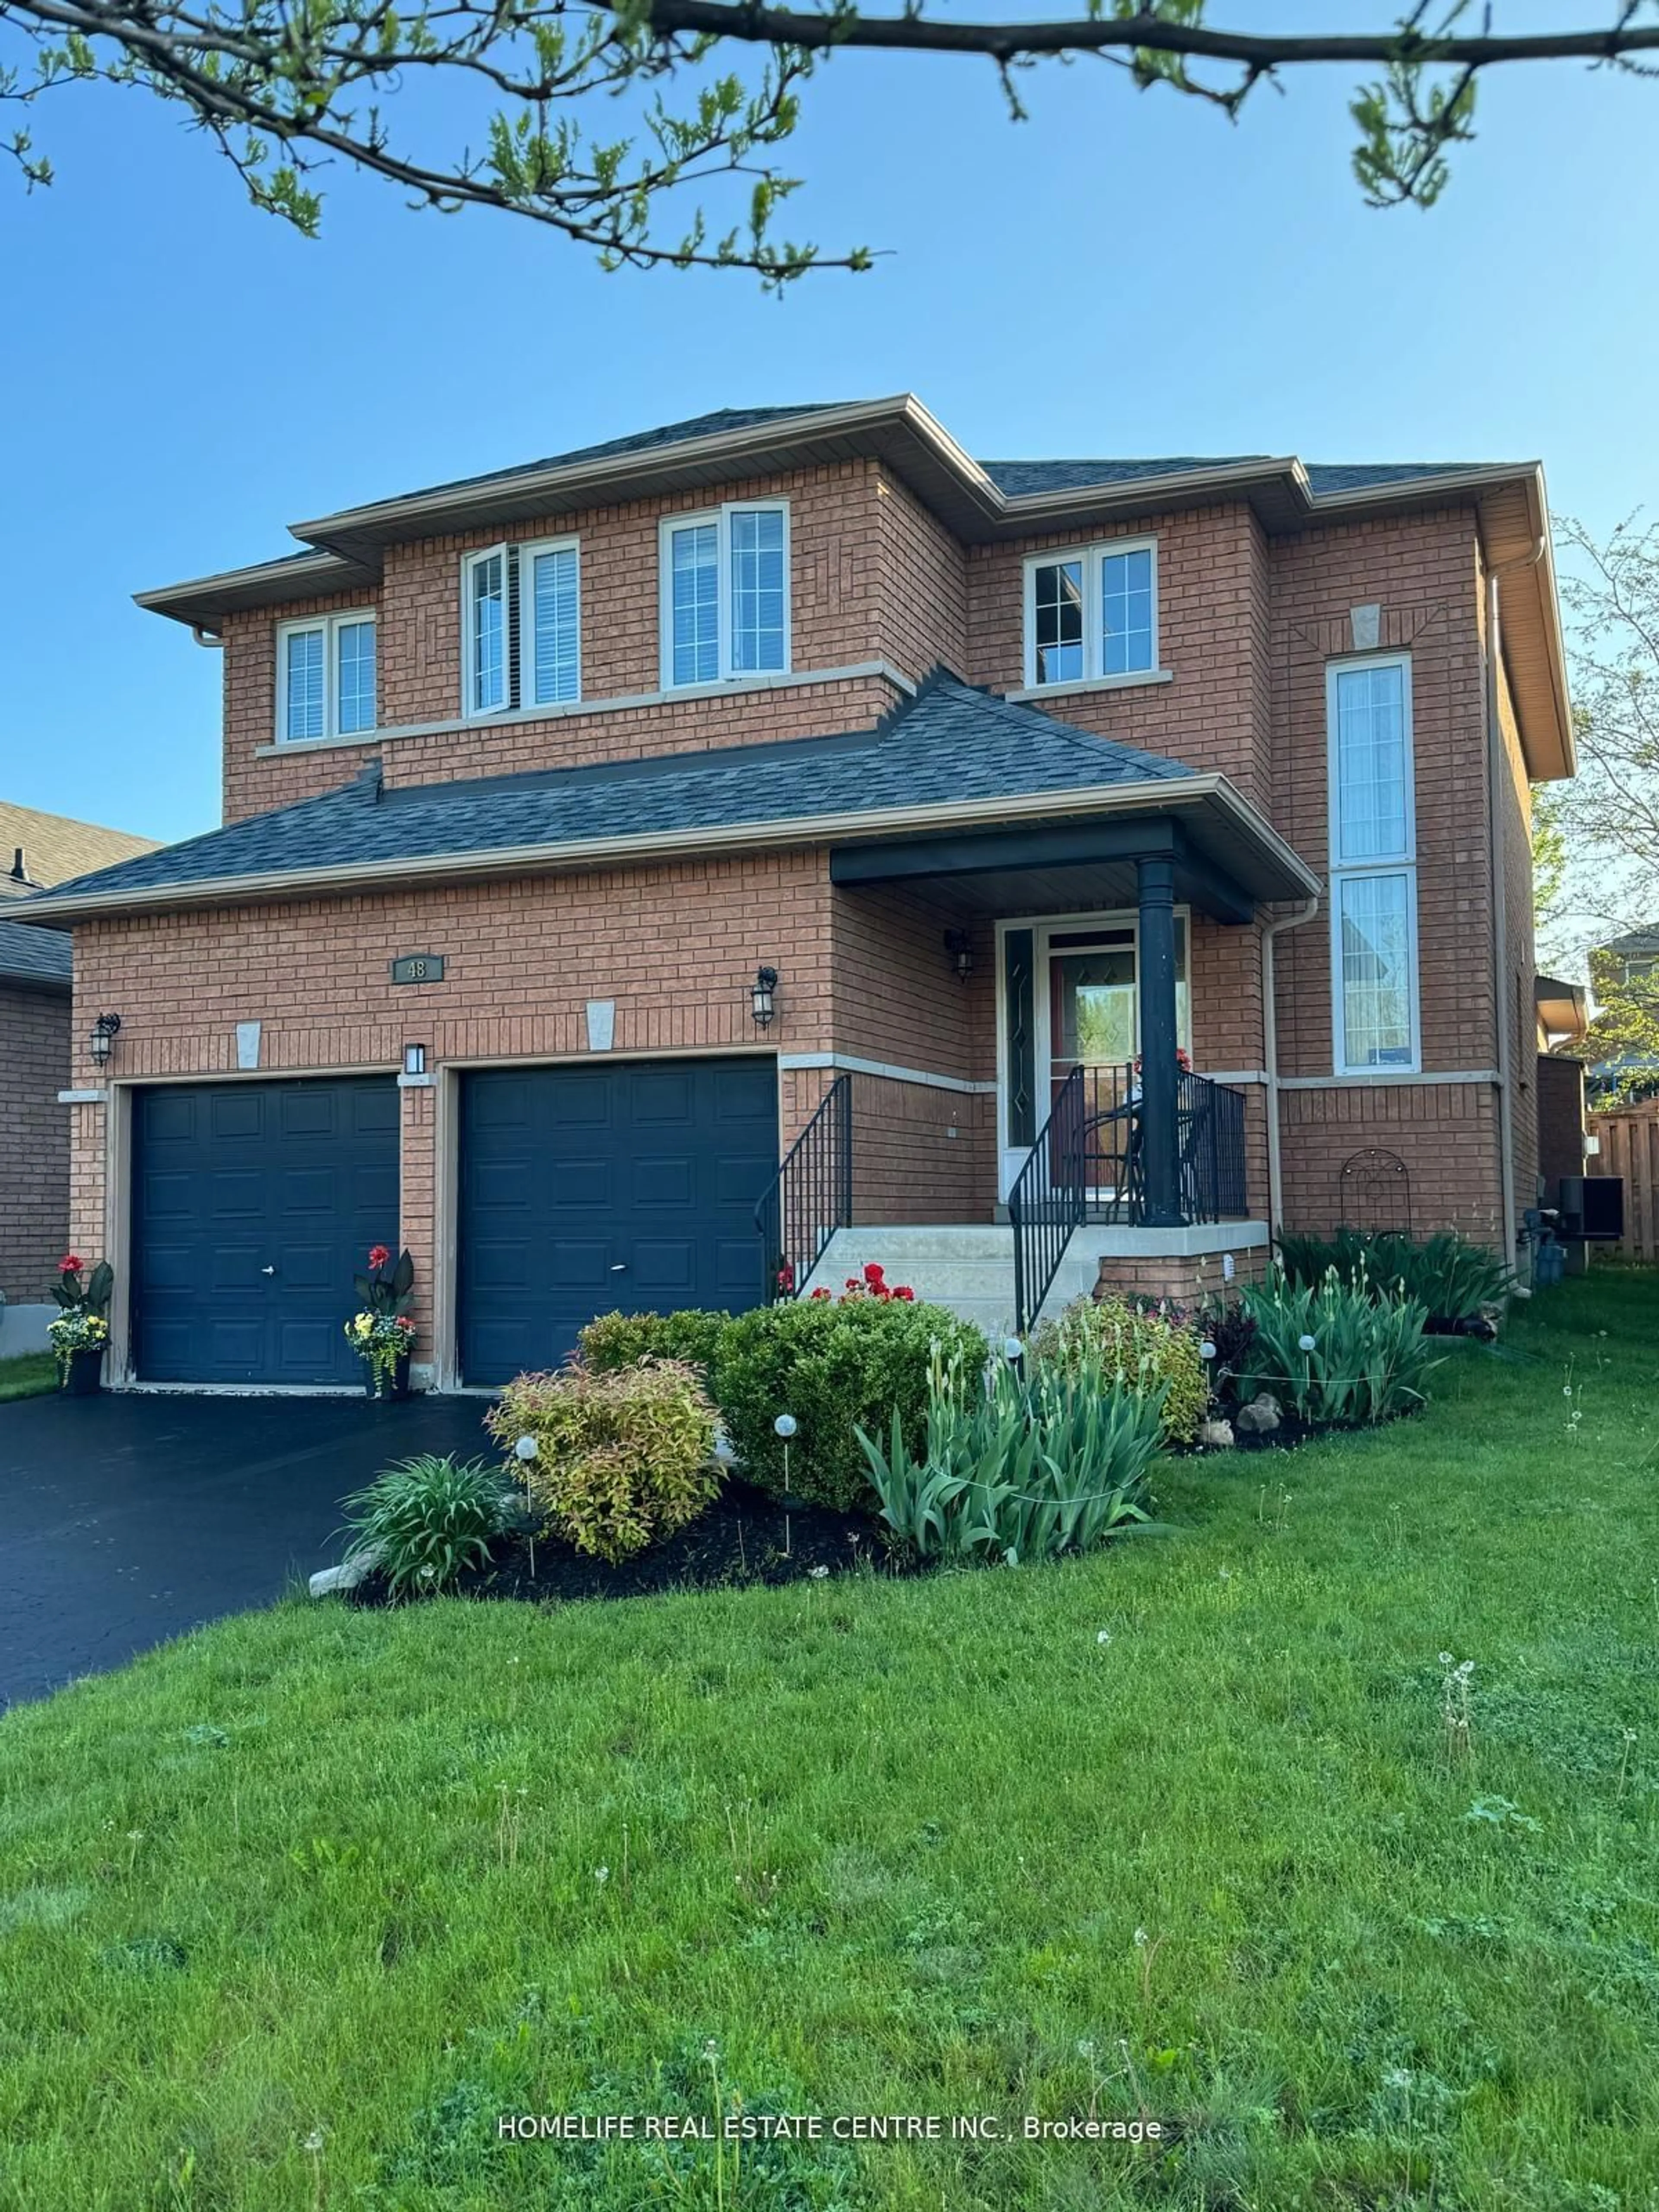 Home with brick exterior material for 48 Prince of Whales Dr, Barrie Ontario L4N 0T1